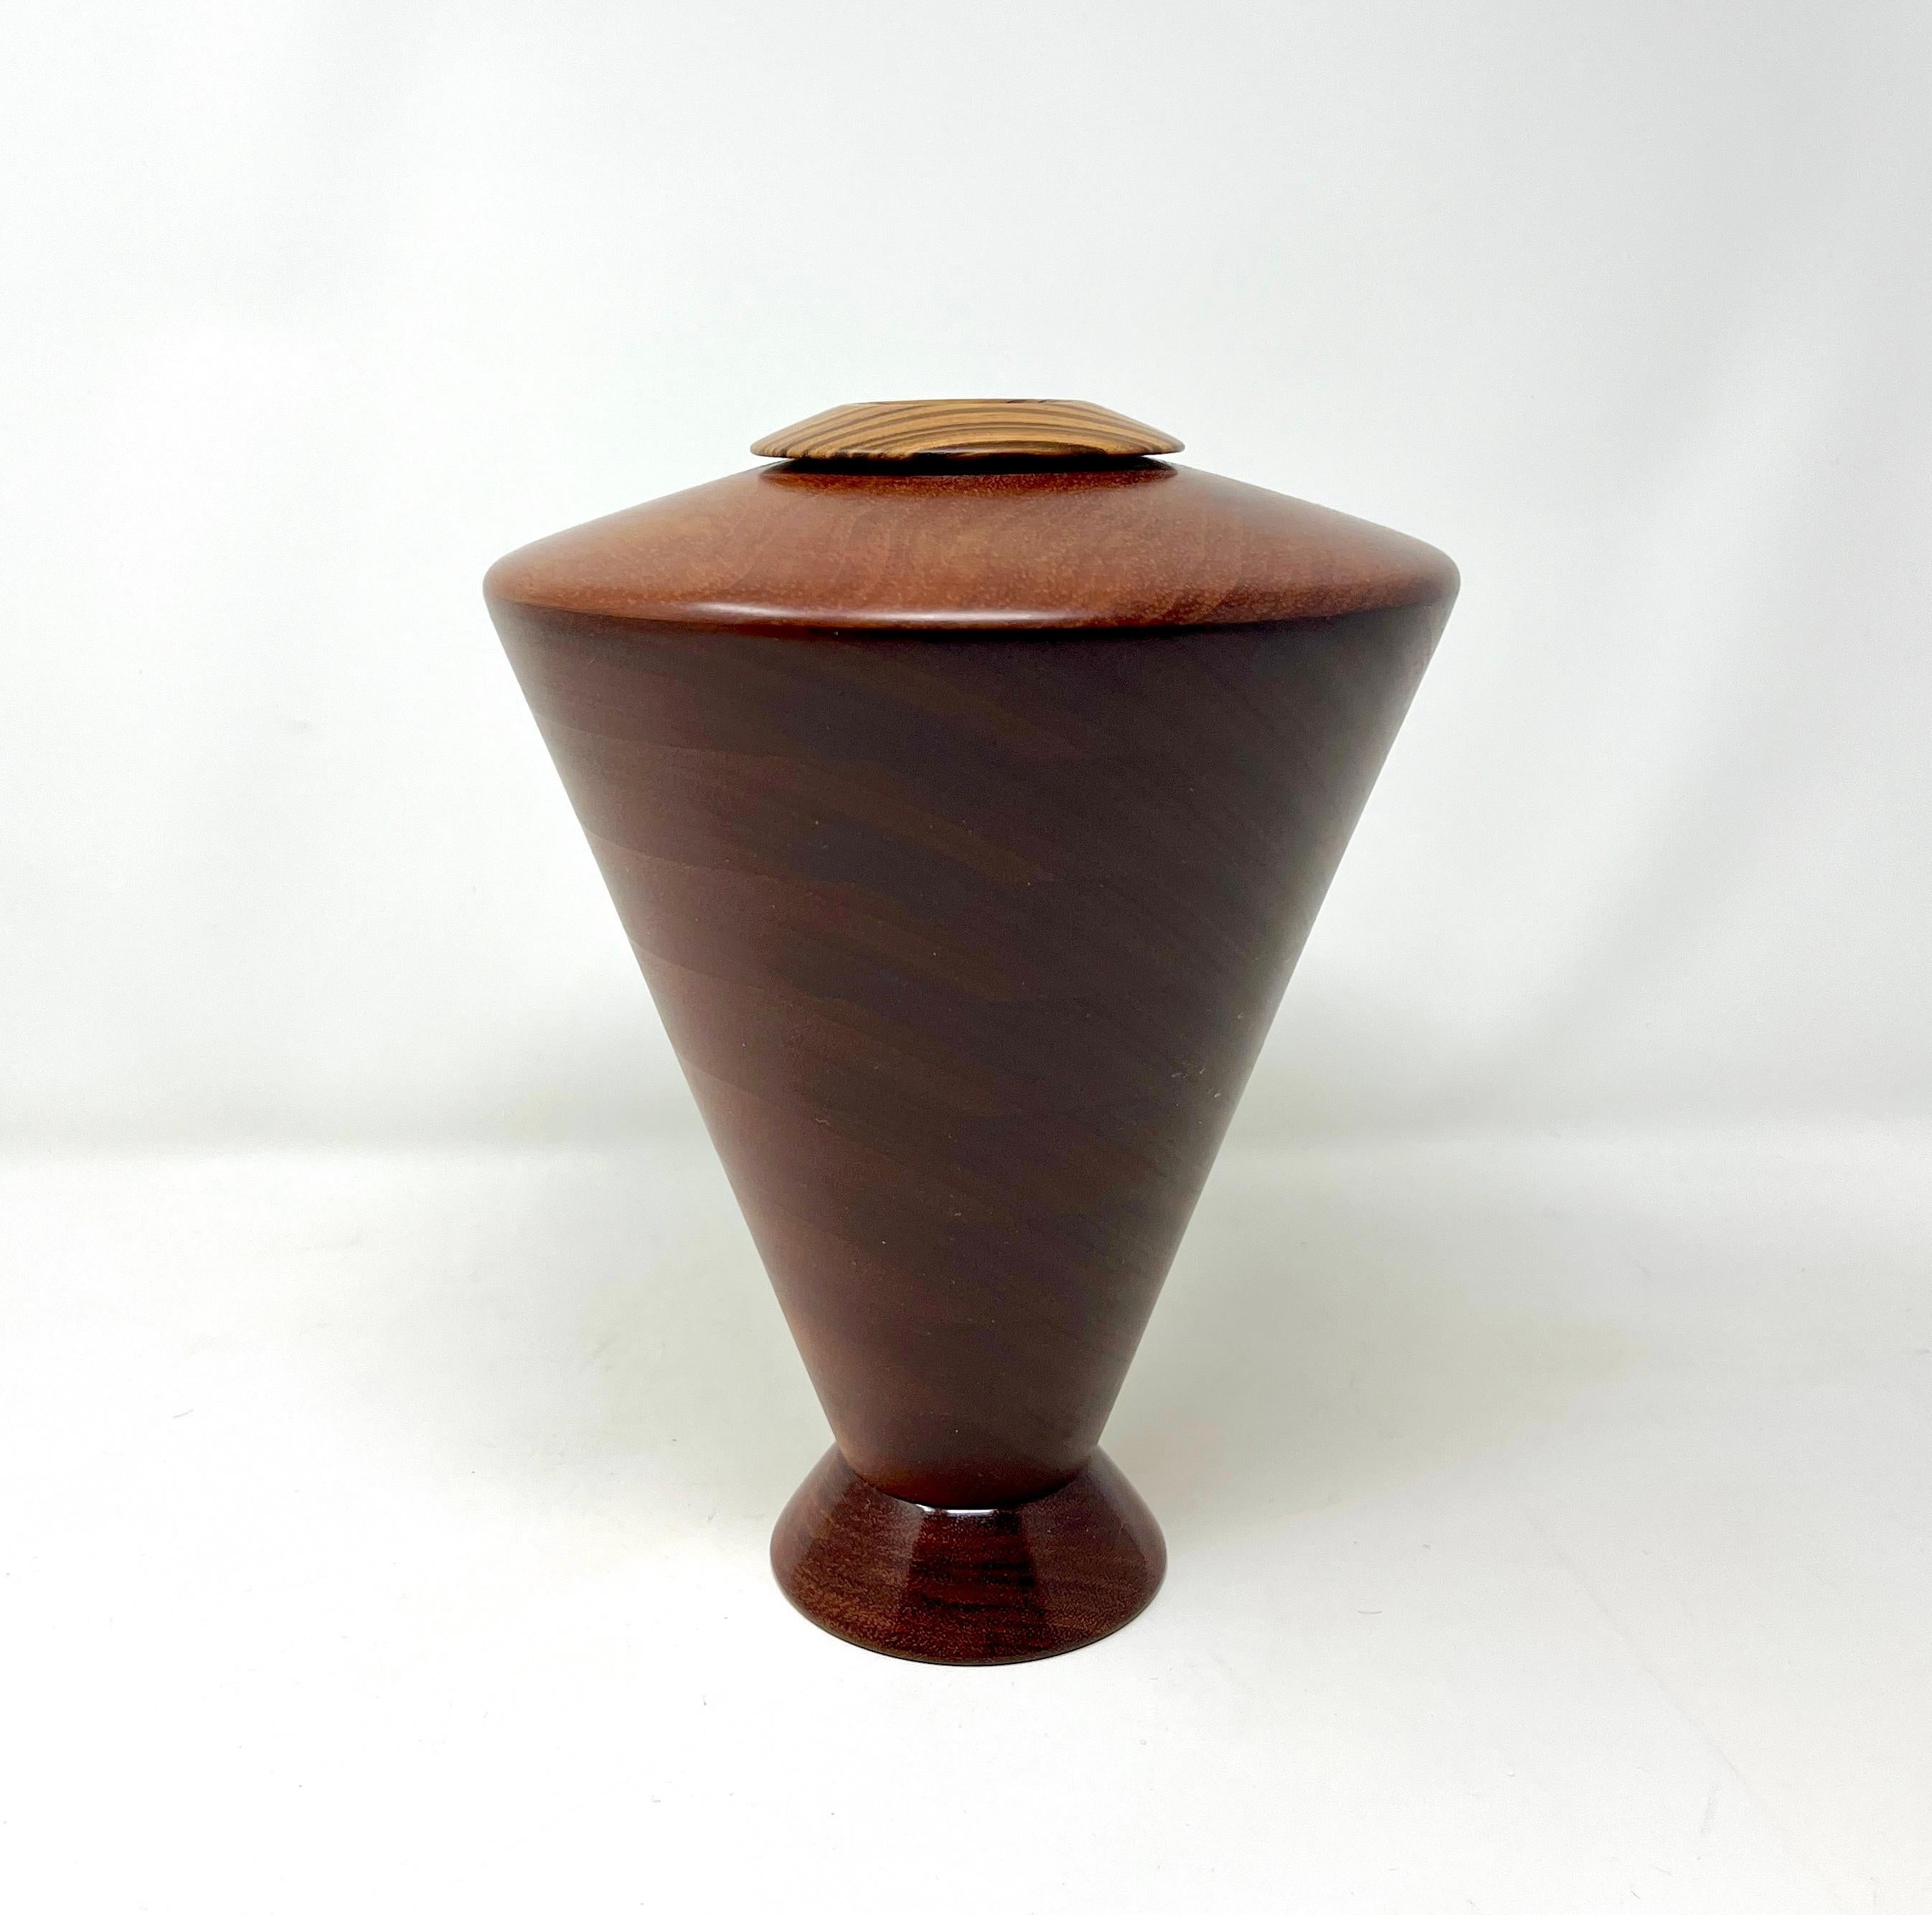 Beautiful example of late 20th/21st century American craftsman Lloyd Cheney who mastered the art of making wood vessels on a ringmaster. Made in 2002, signed and penny stamped, this turned wood vessel features a striking zebra wood rim atop an